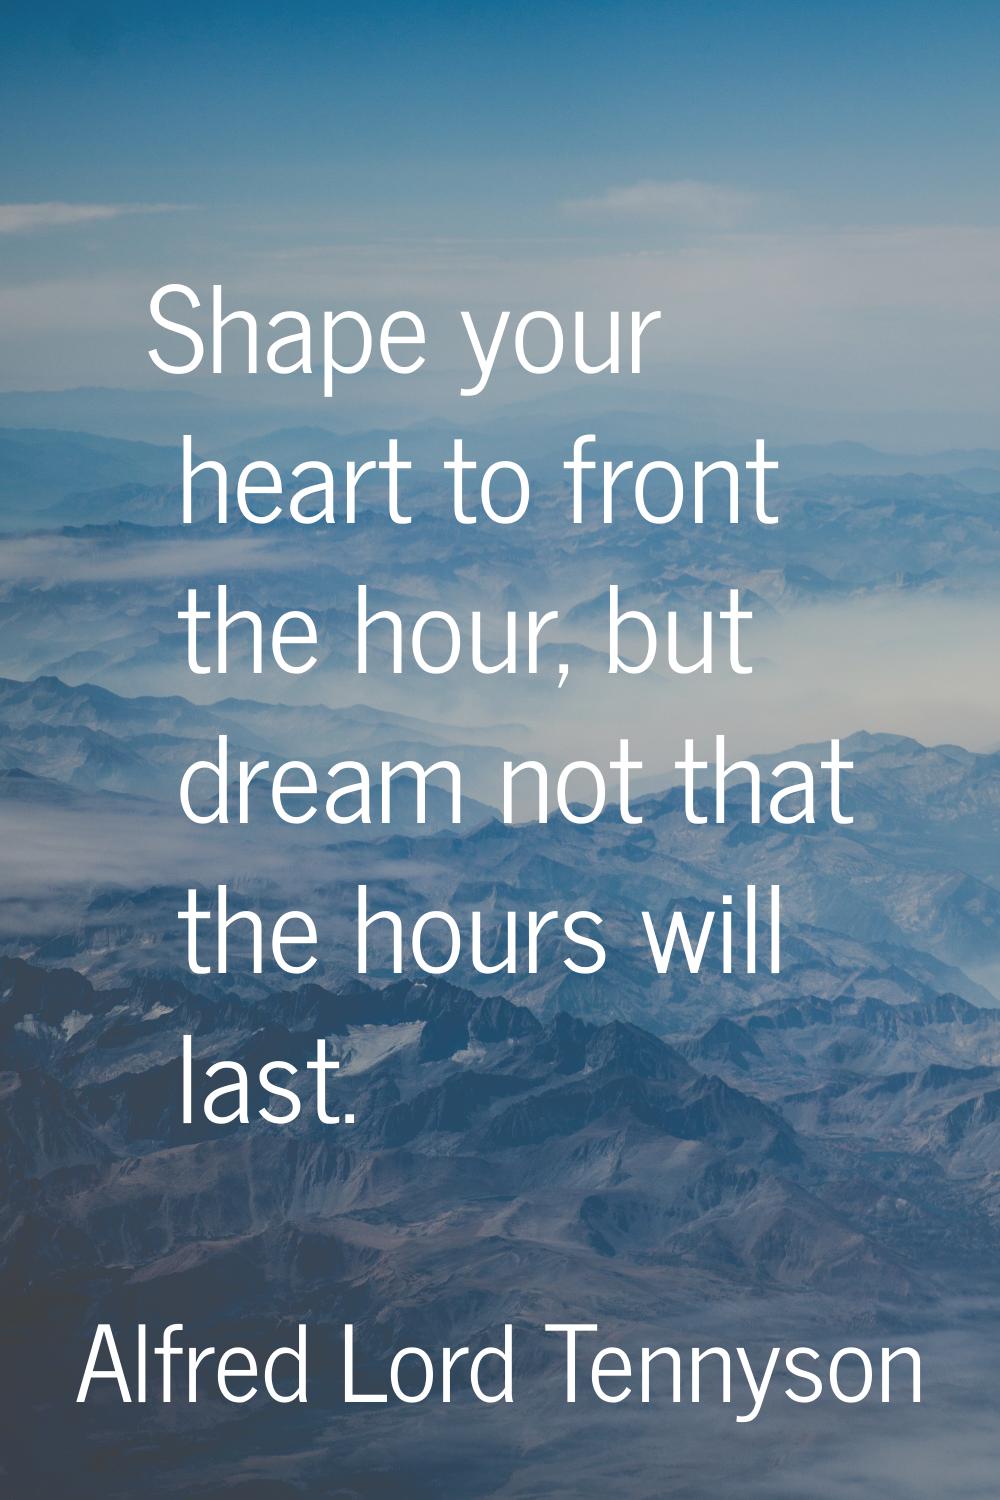 Shape your heart to front the hour, but dream not that the hours will last.